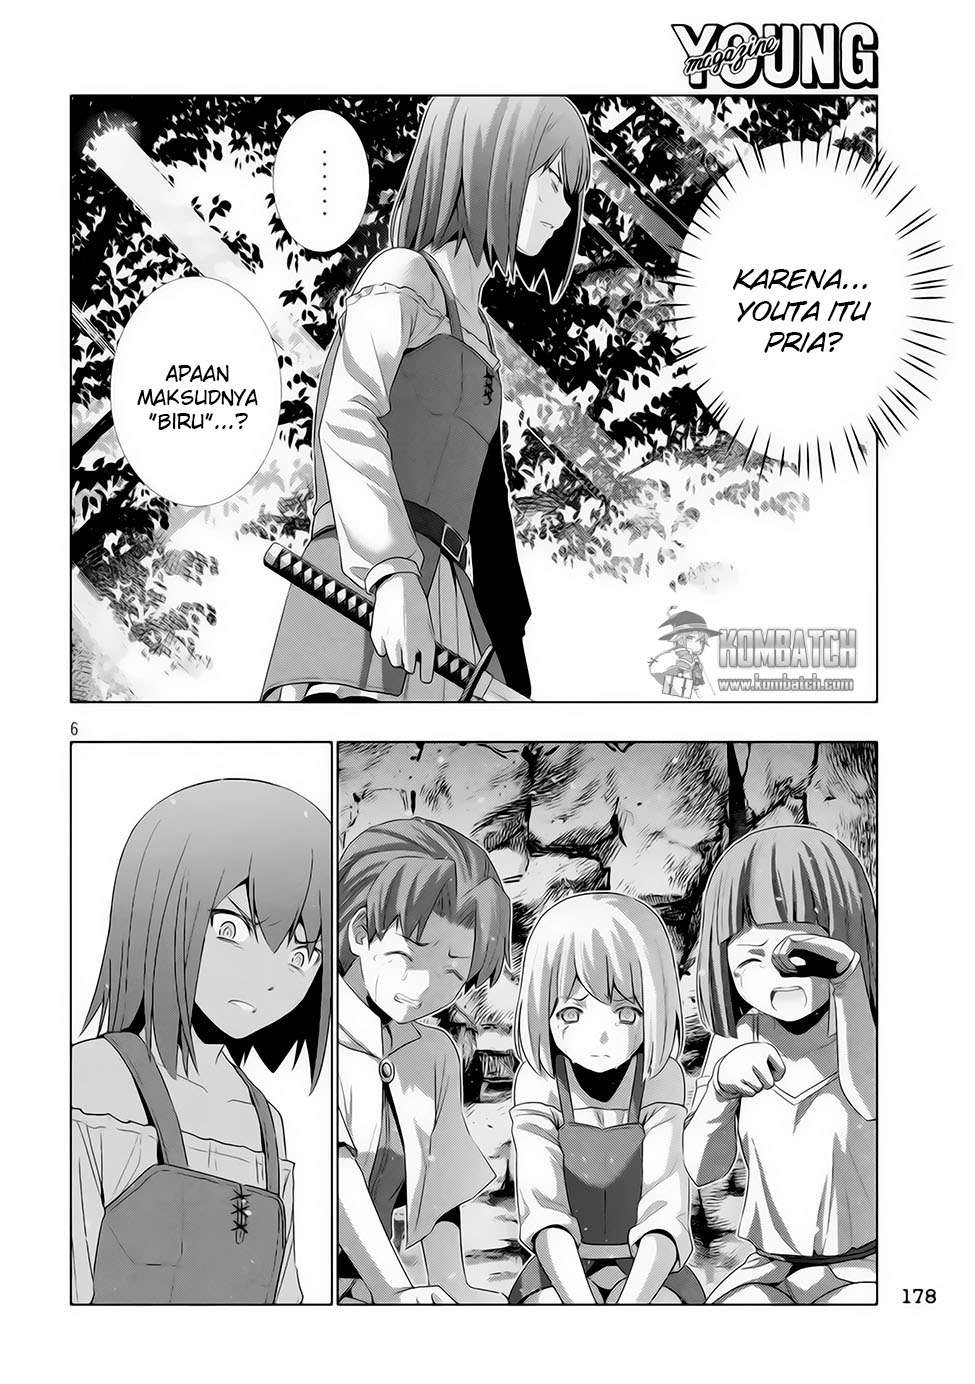 Parallel Paradise Chapter parallel paradise 014 Bahasa Indonesia